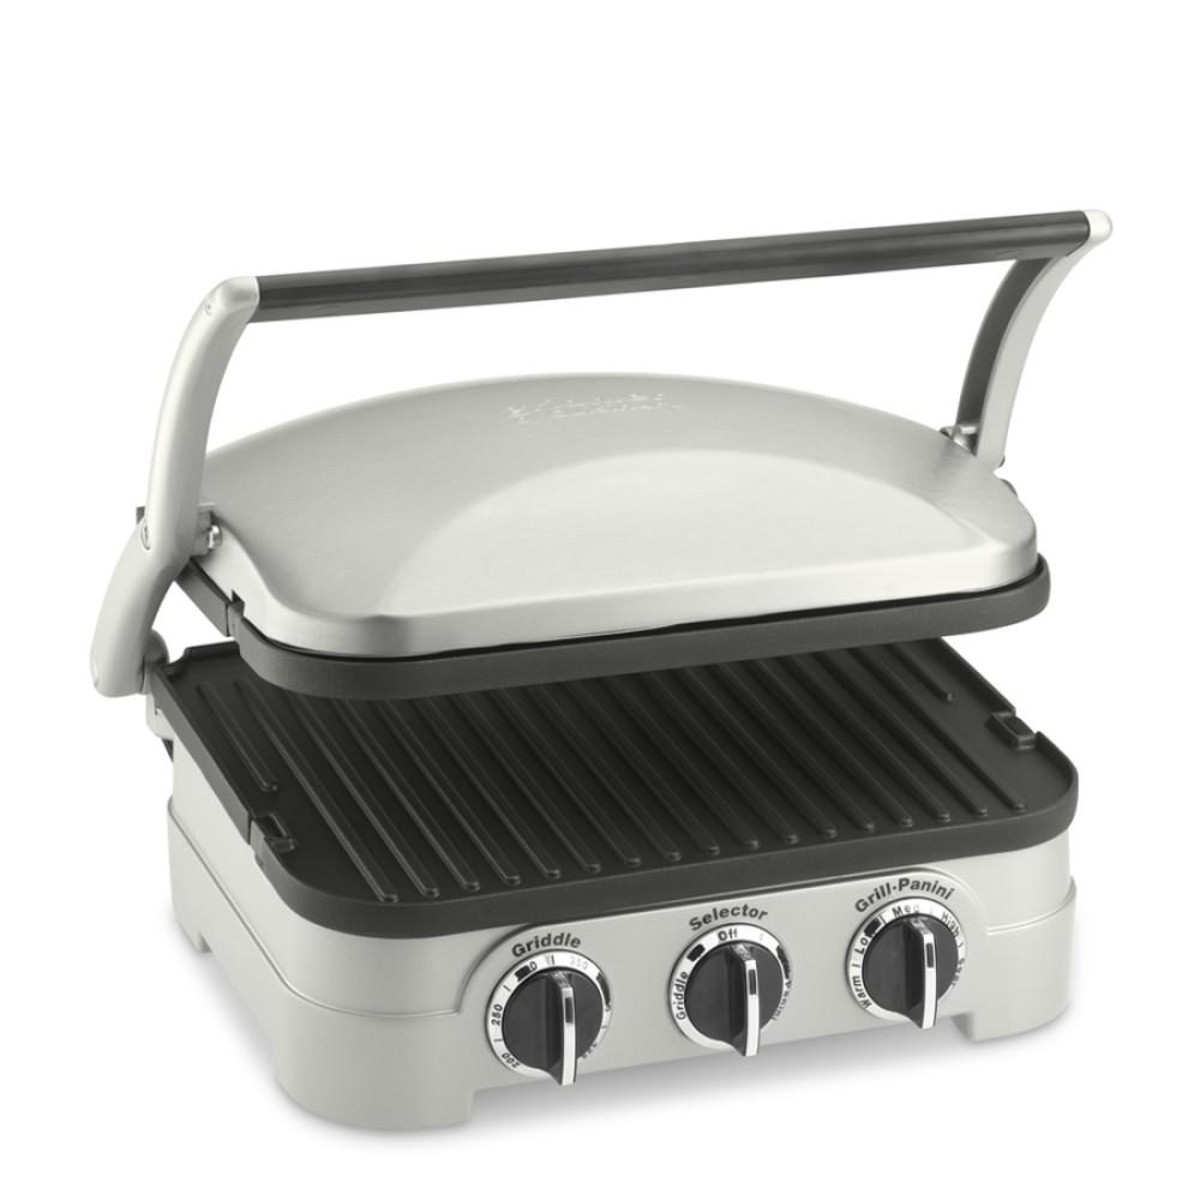 Cusinart Panini Grill
 Cuisinart Griddler Grill Griddle & Panini Press